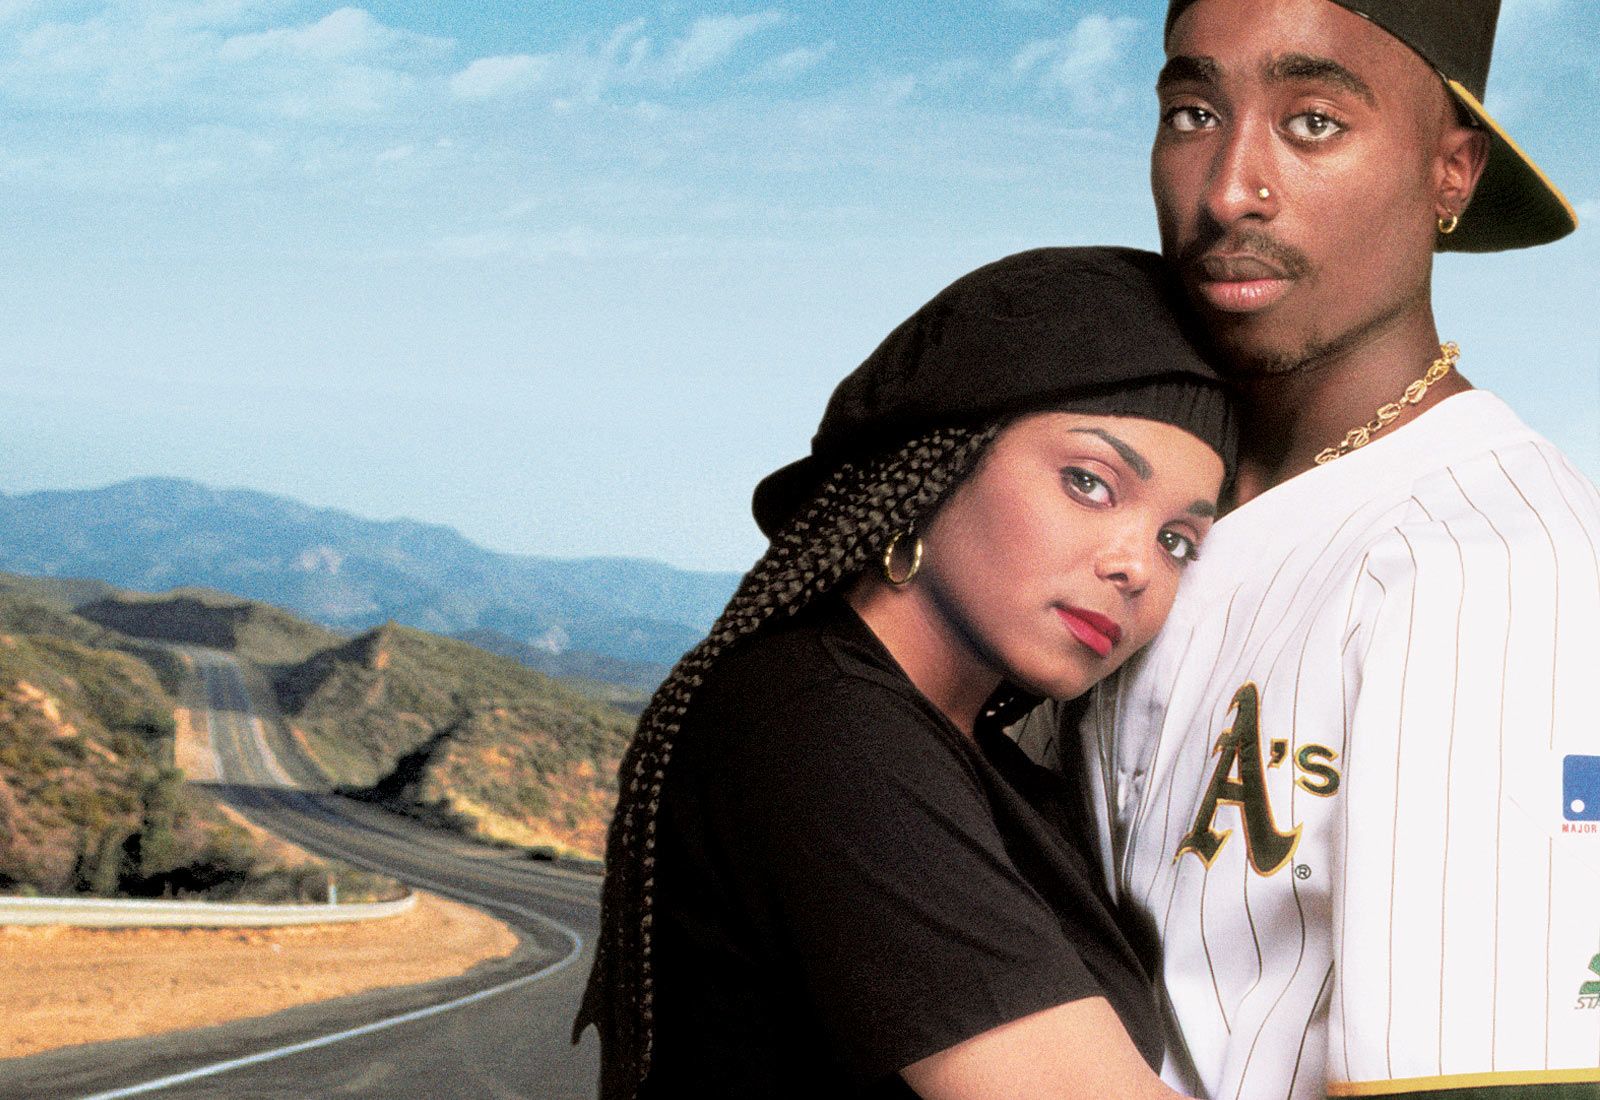 Watch Poetic Justice.